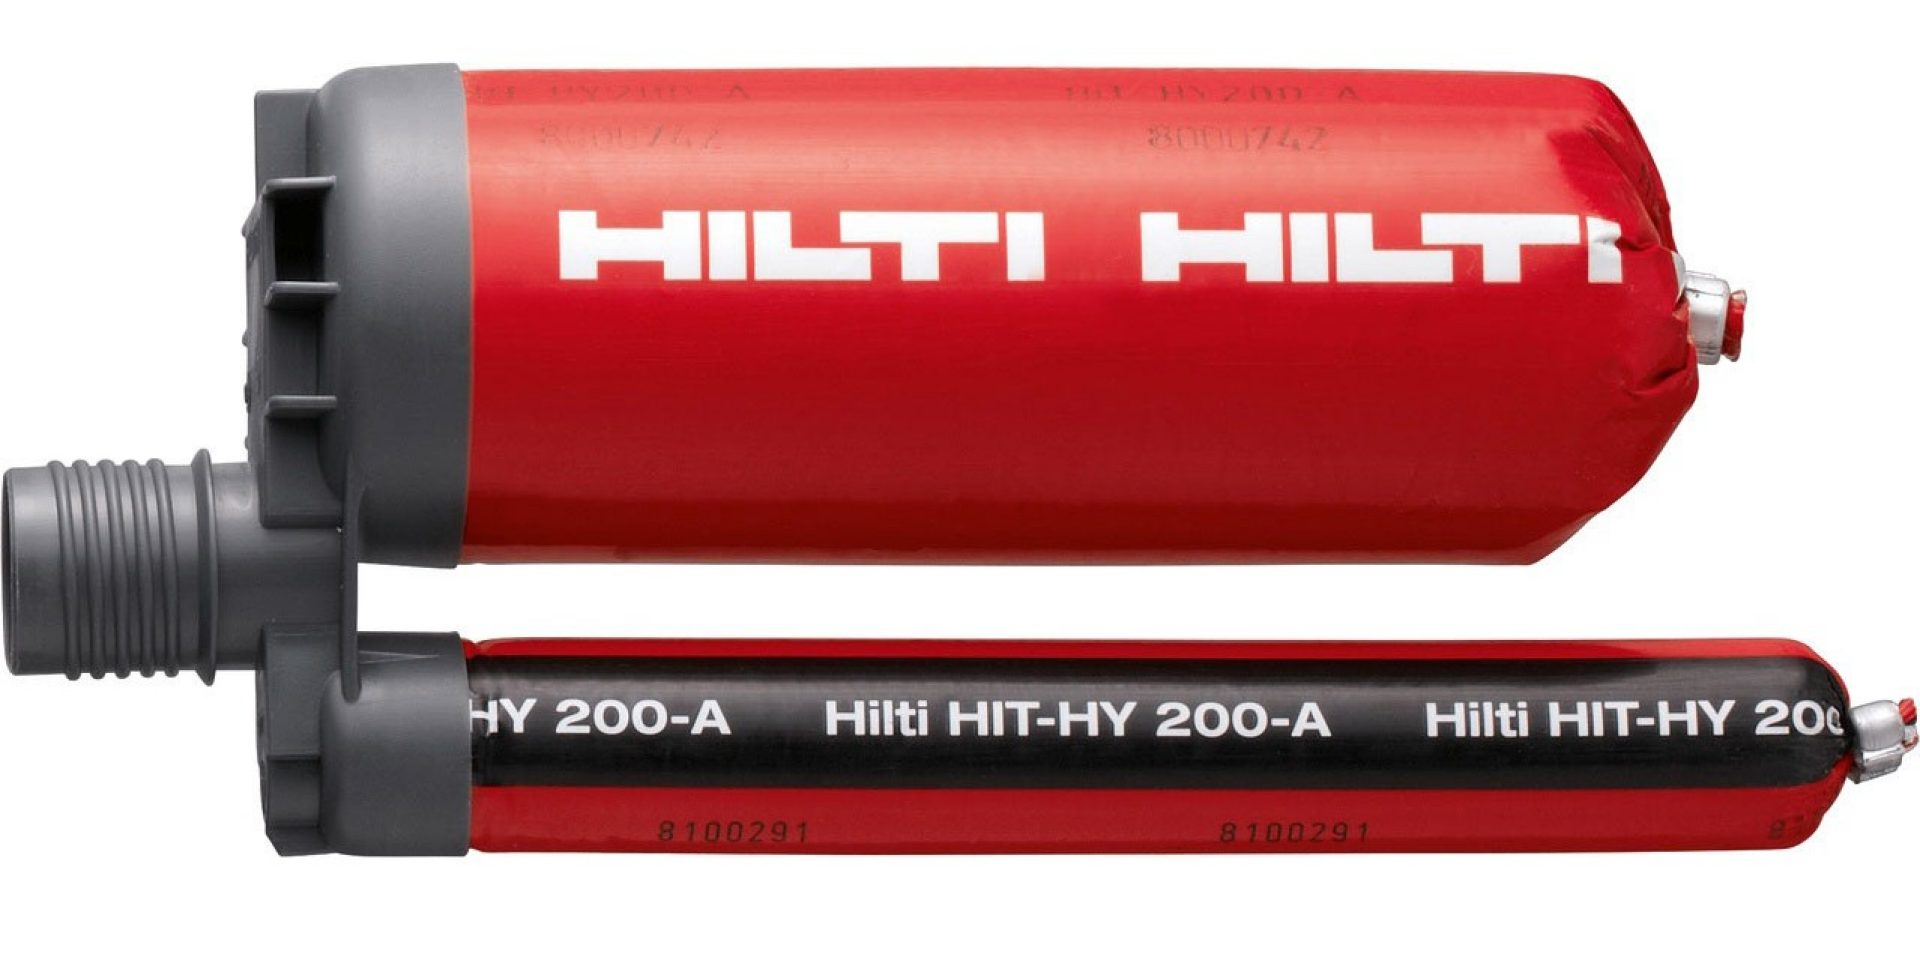 Hilti injectable mortar HIT-HY 200-A